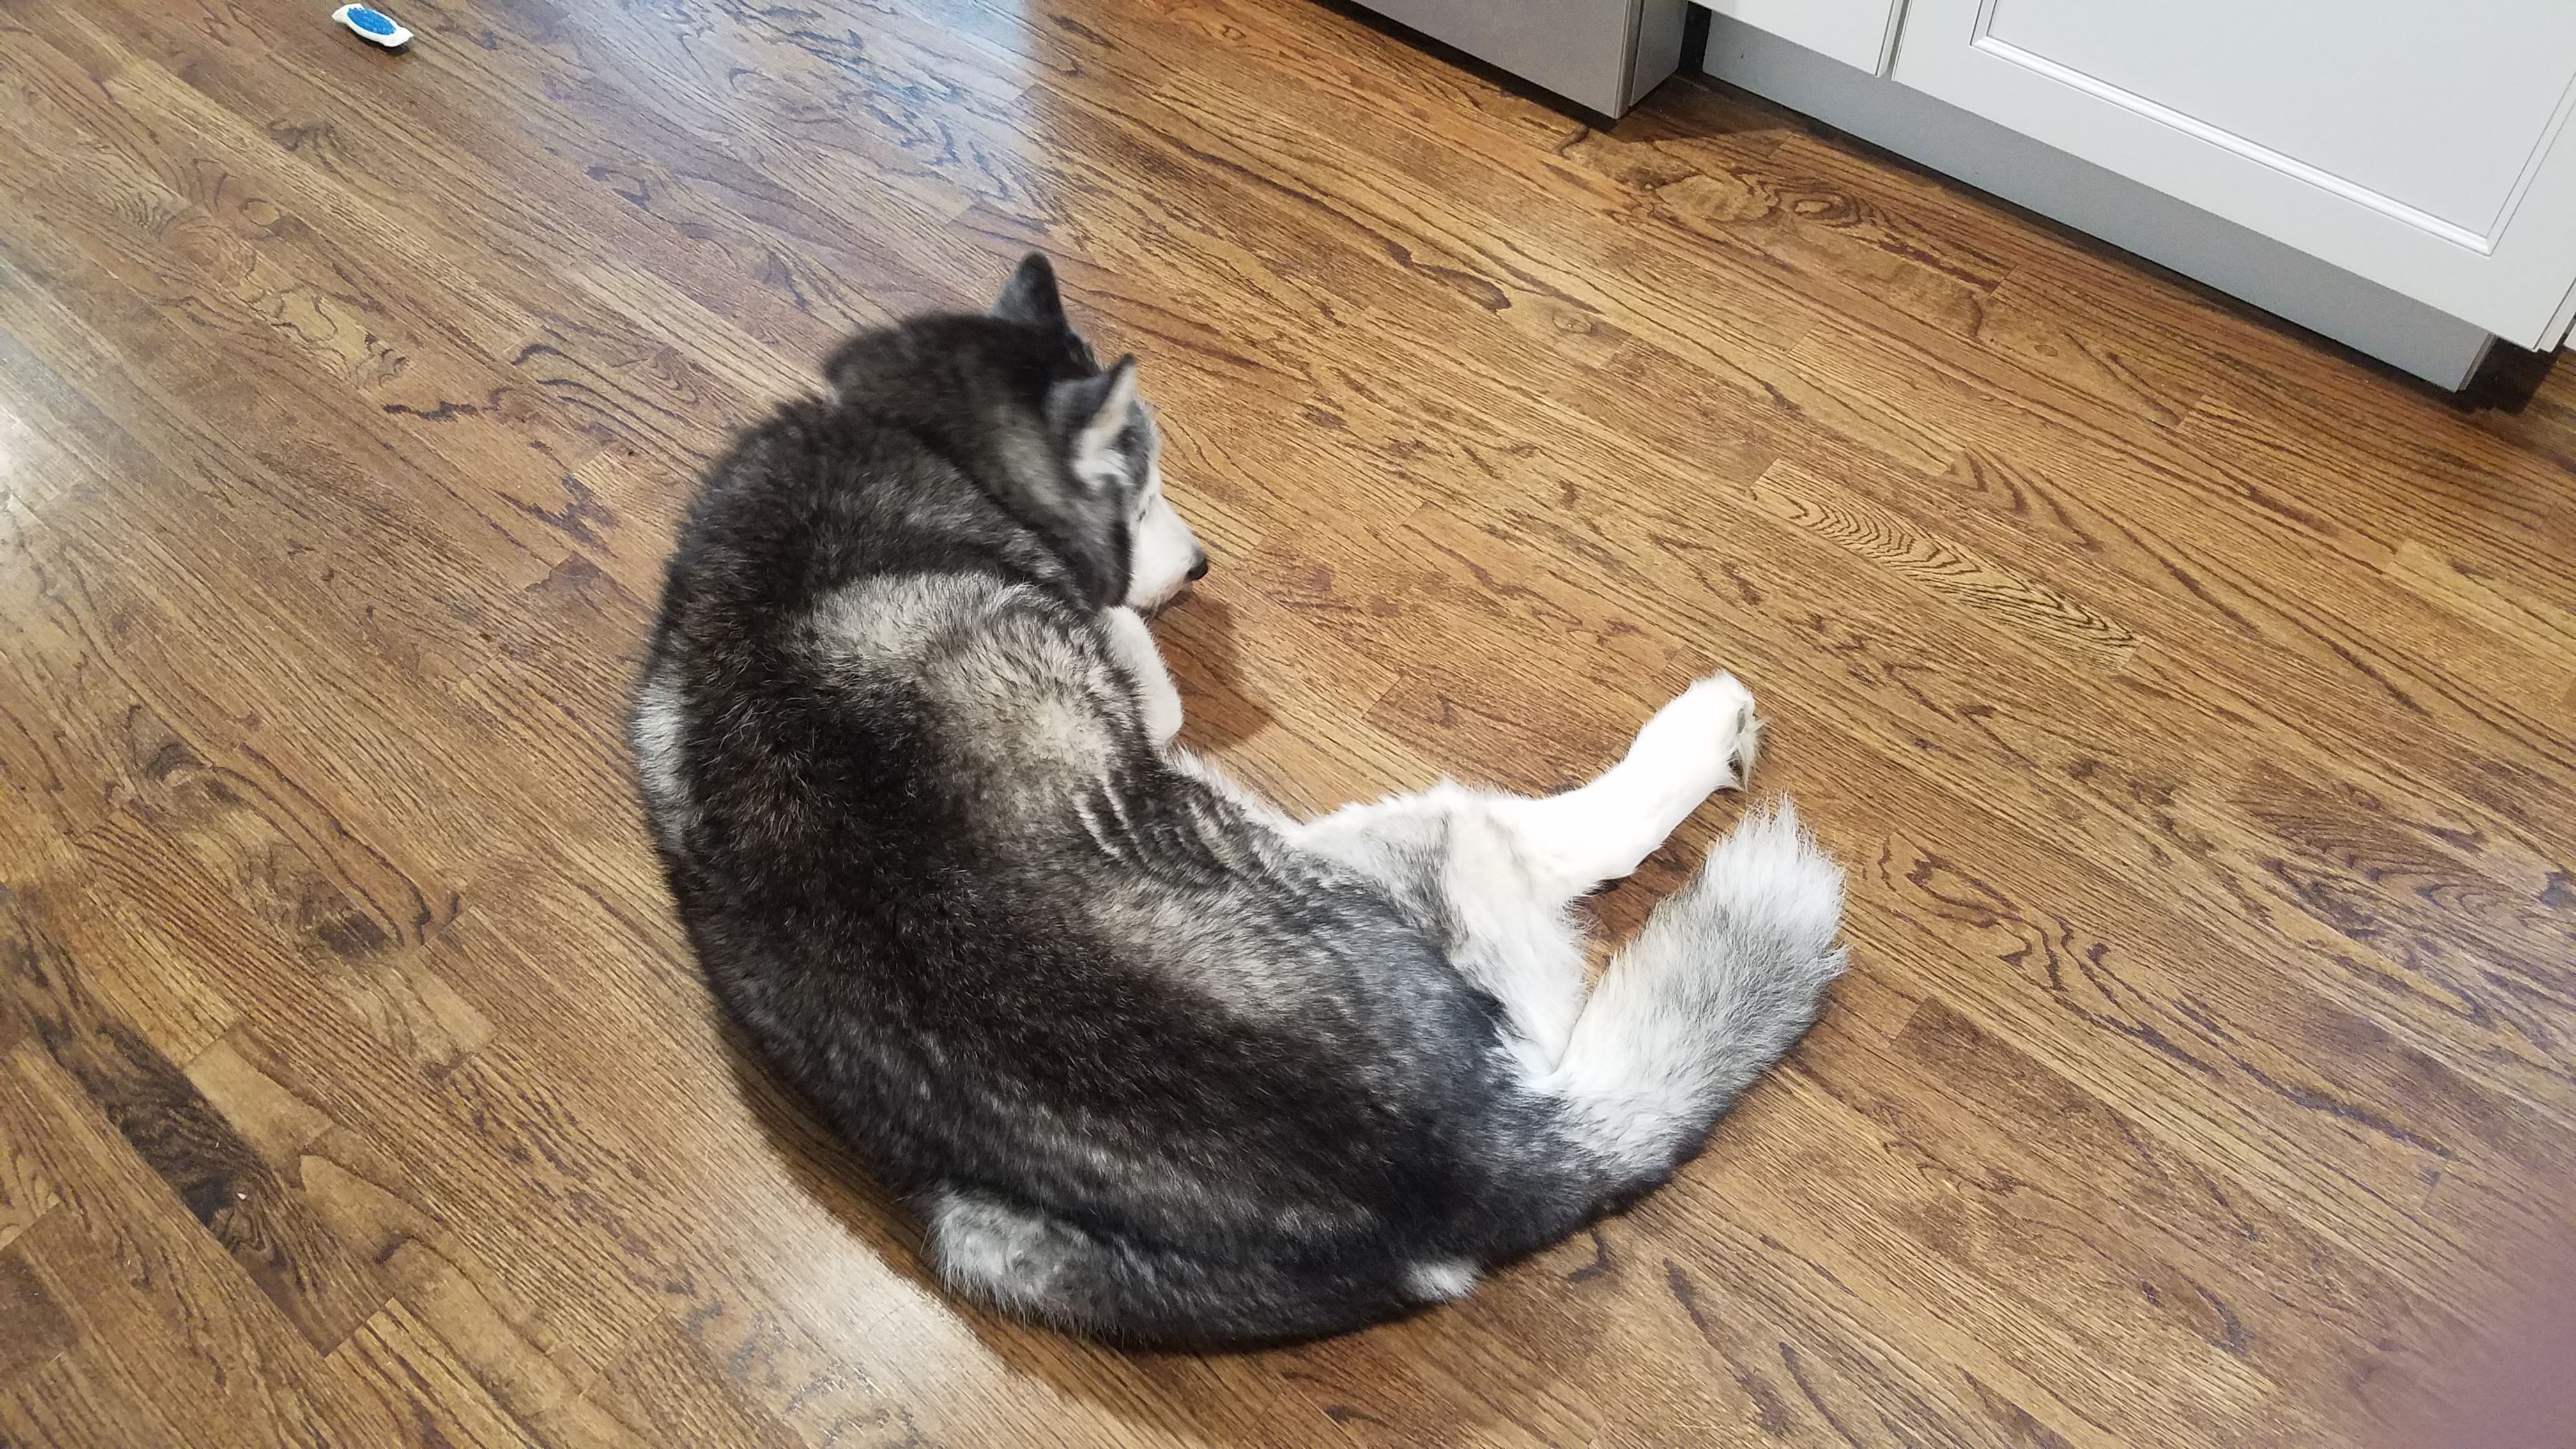 Siberian Husky fluffy black and white dog curled up on floor